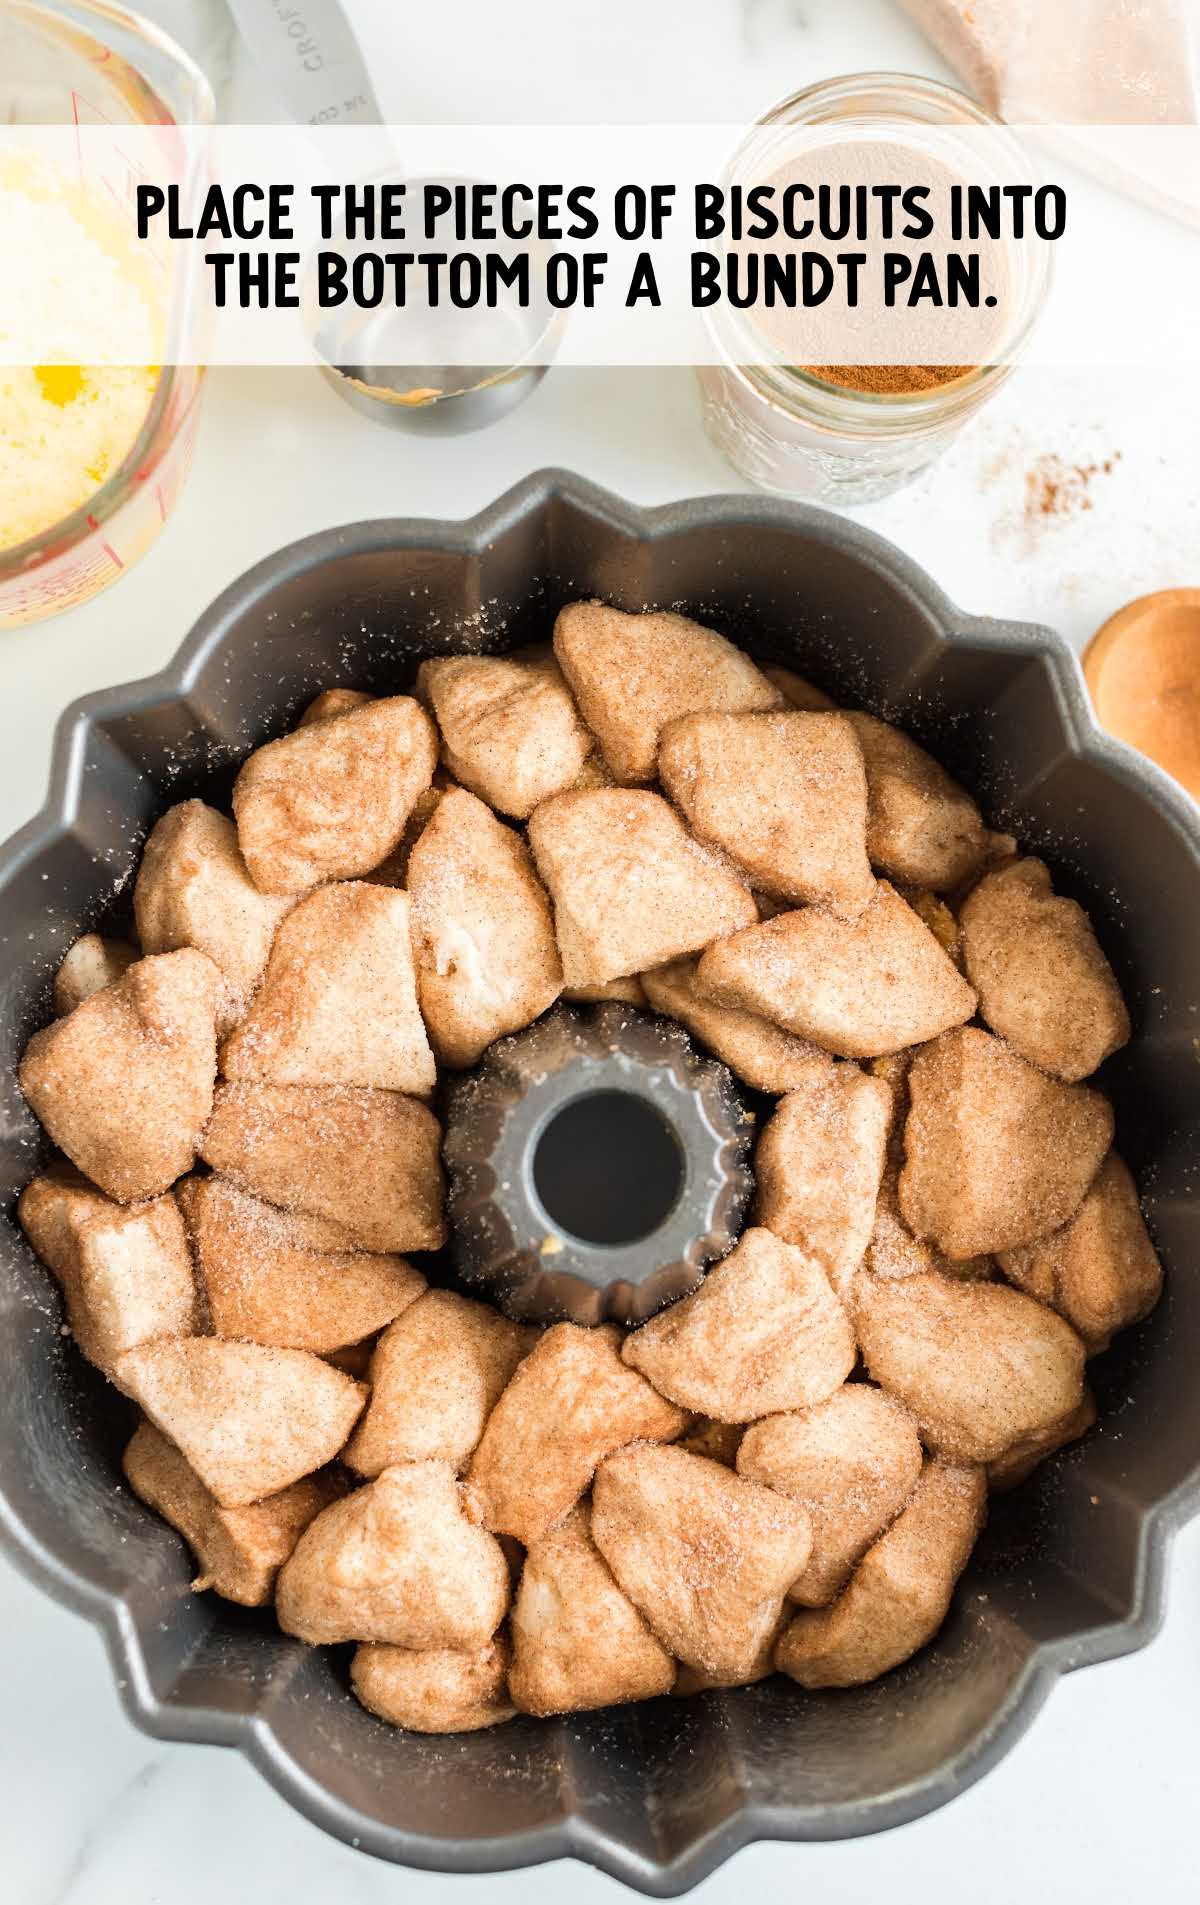 biscuits placed in the bottom of the bundt pan